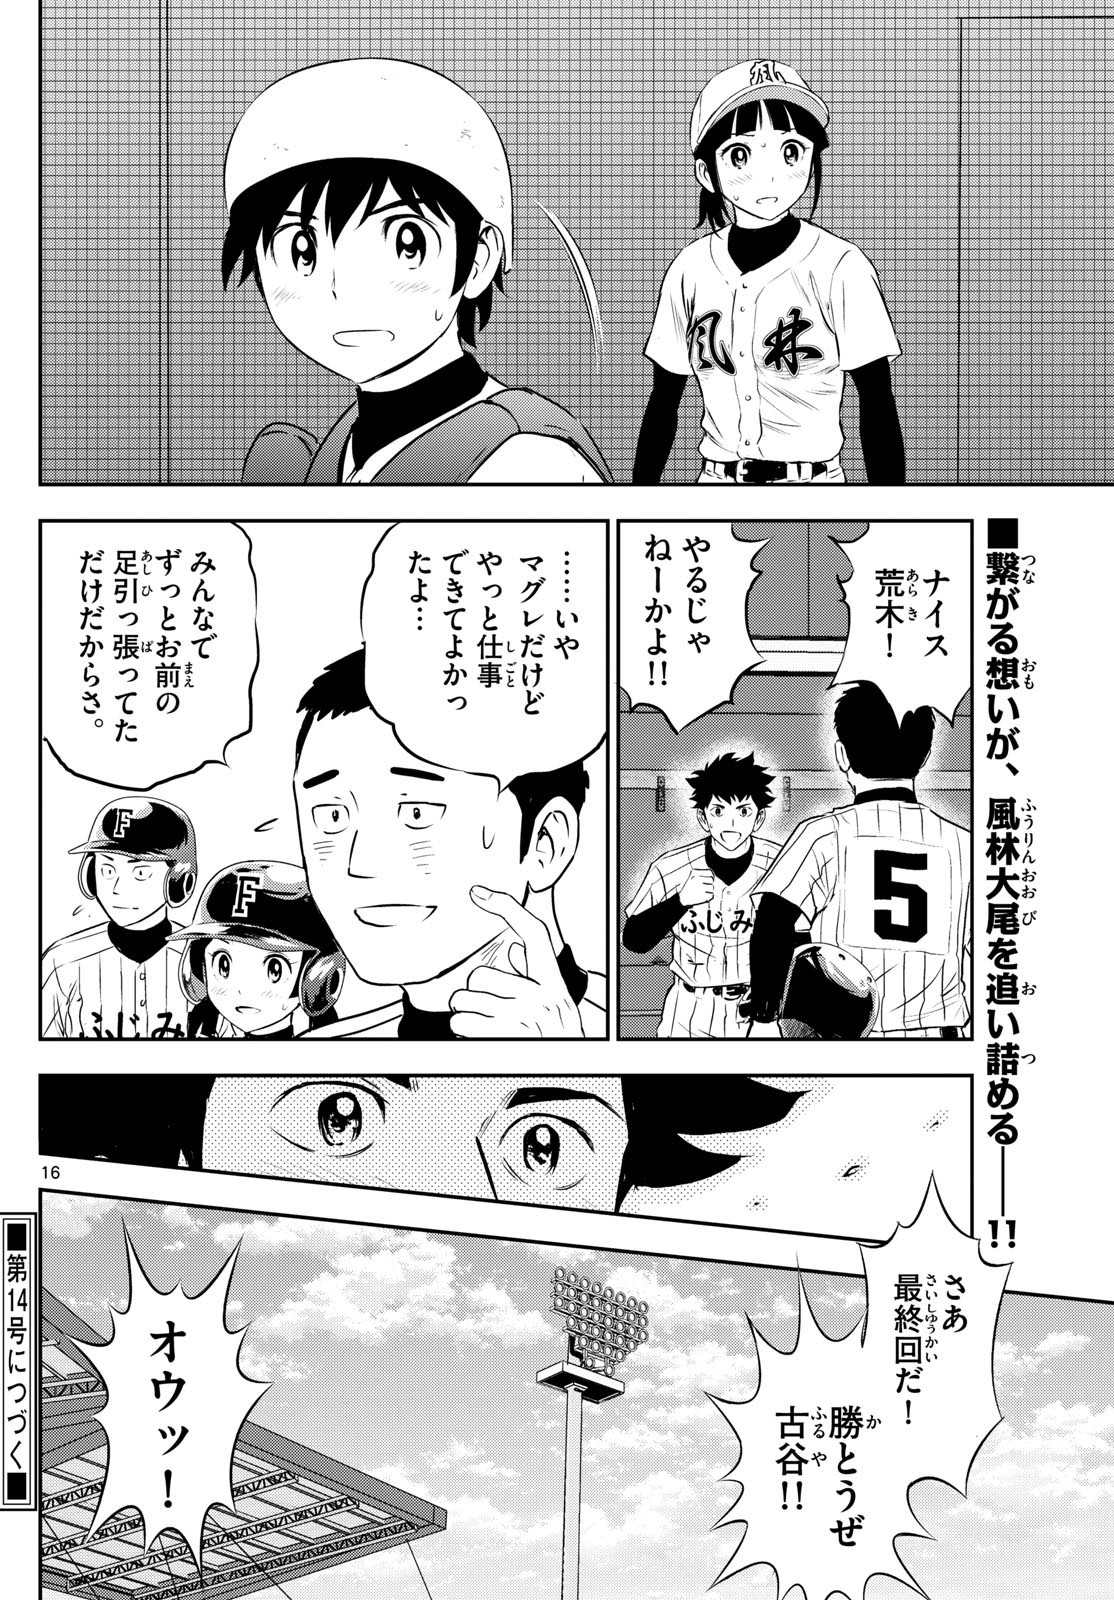 Major 2nd - メジャーセカンド - Chapter 273 - Page 16